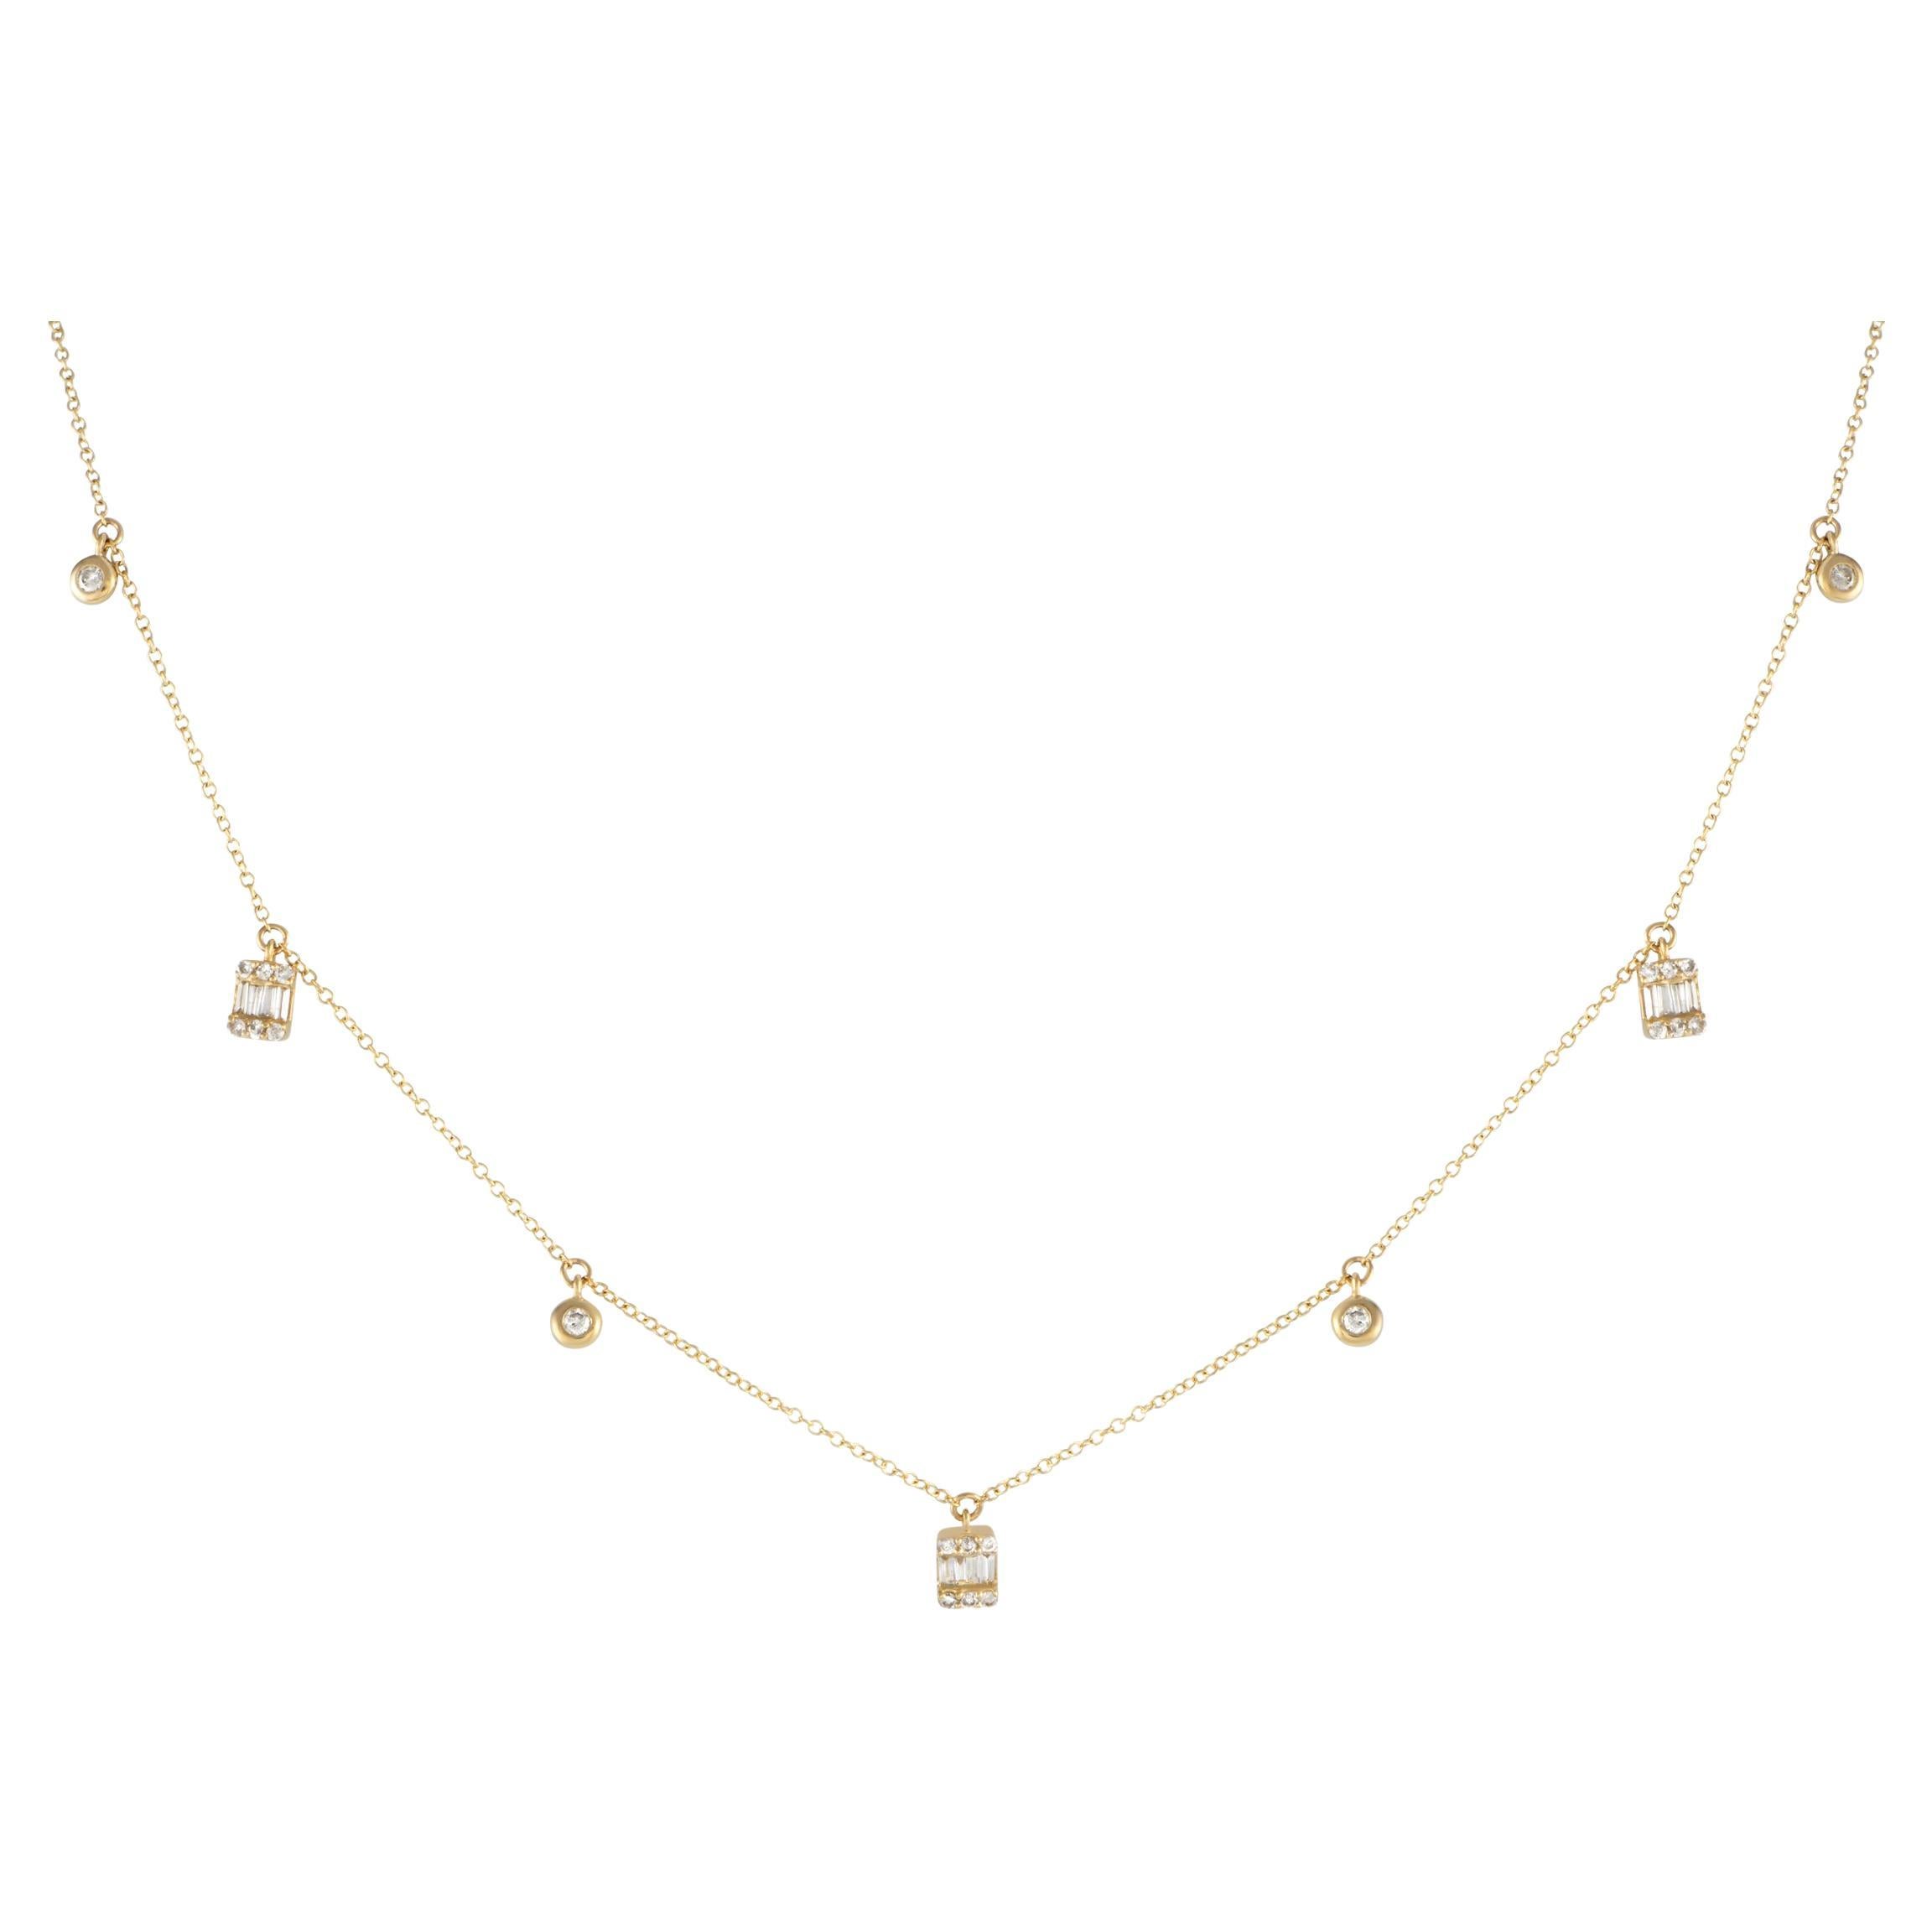 LB Exclusive 14K Yellow Gold 0.26ct Diamond Station Necklace NK01349